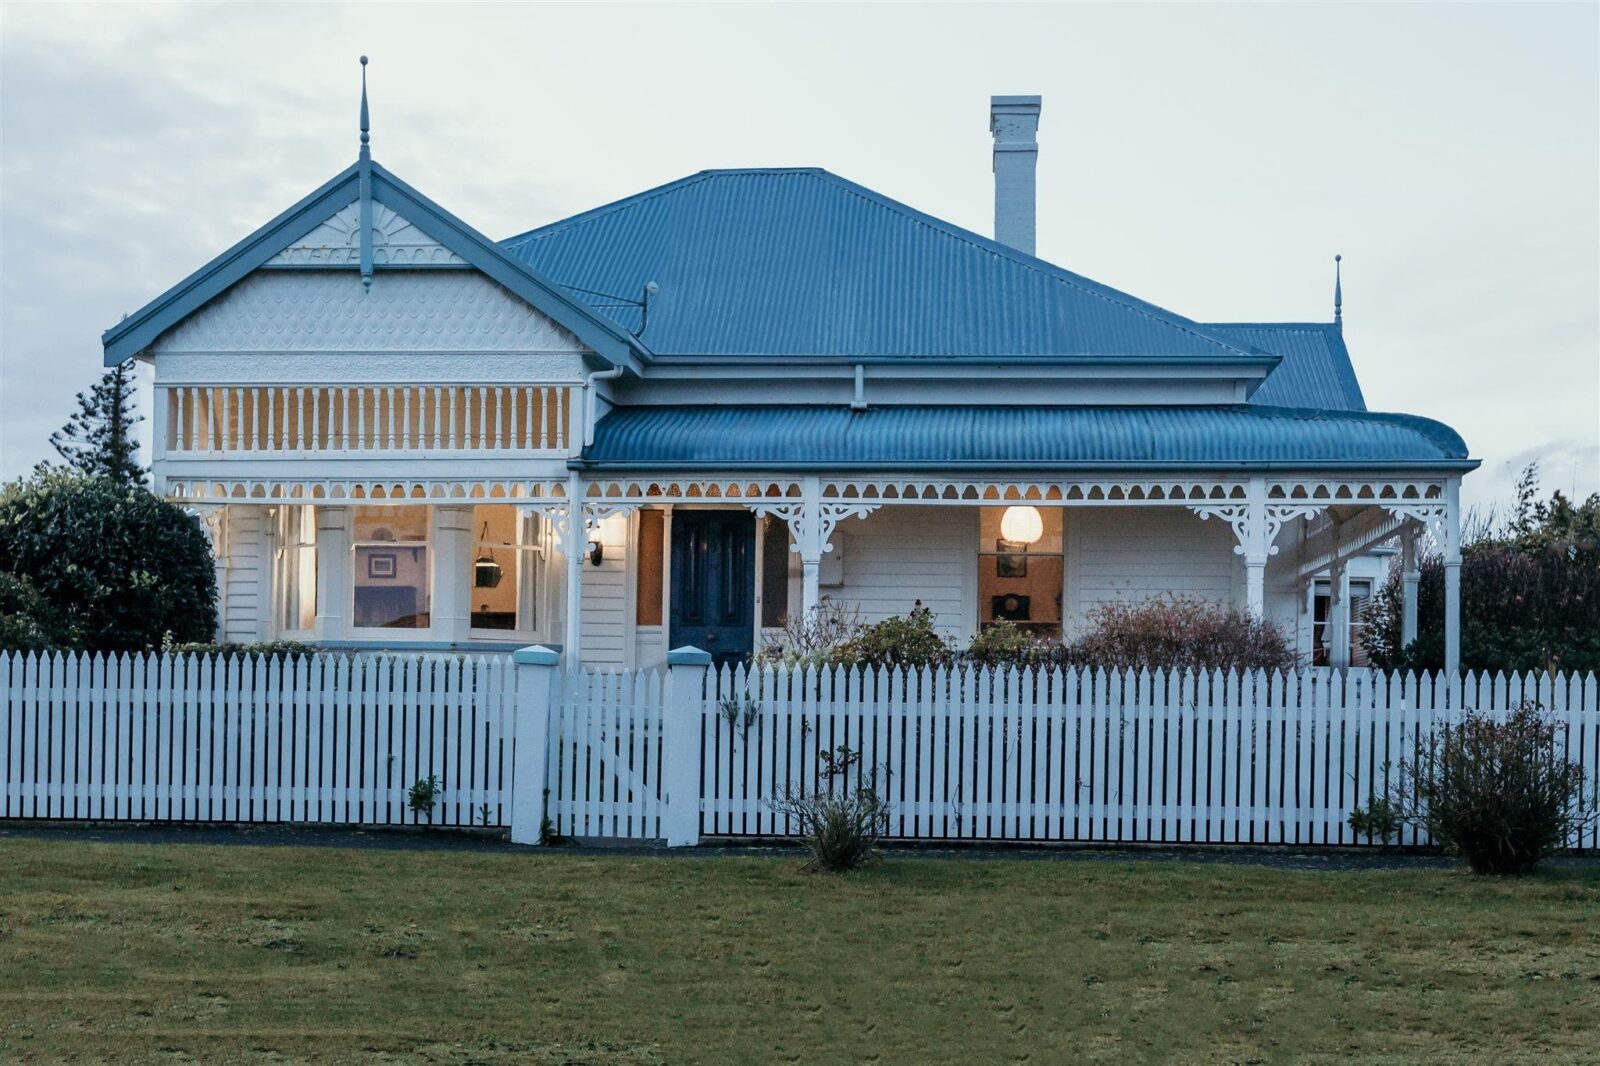 3 house, owned by 3 generations, well loved and cared for, great garden, white picket fence